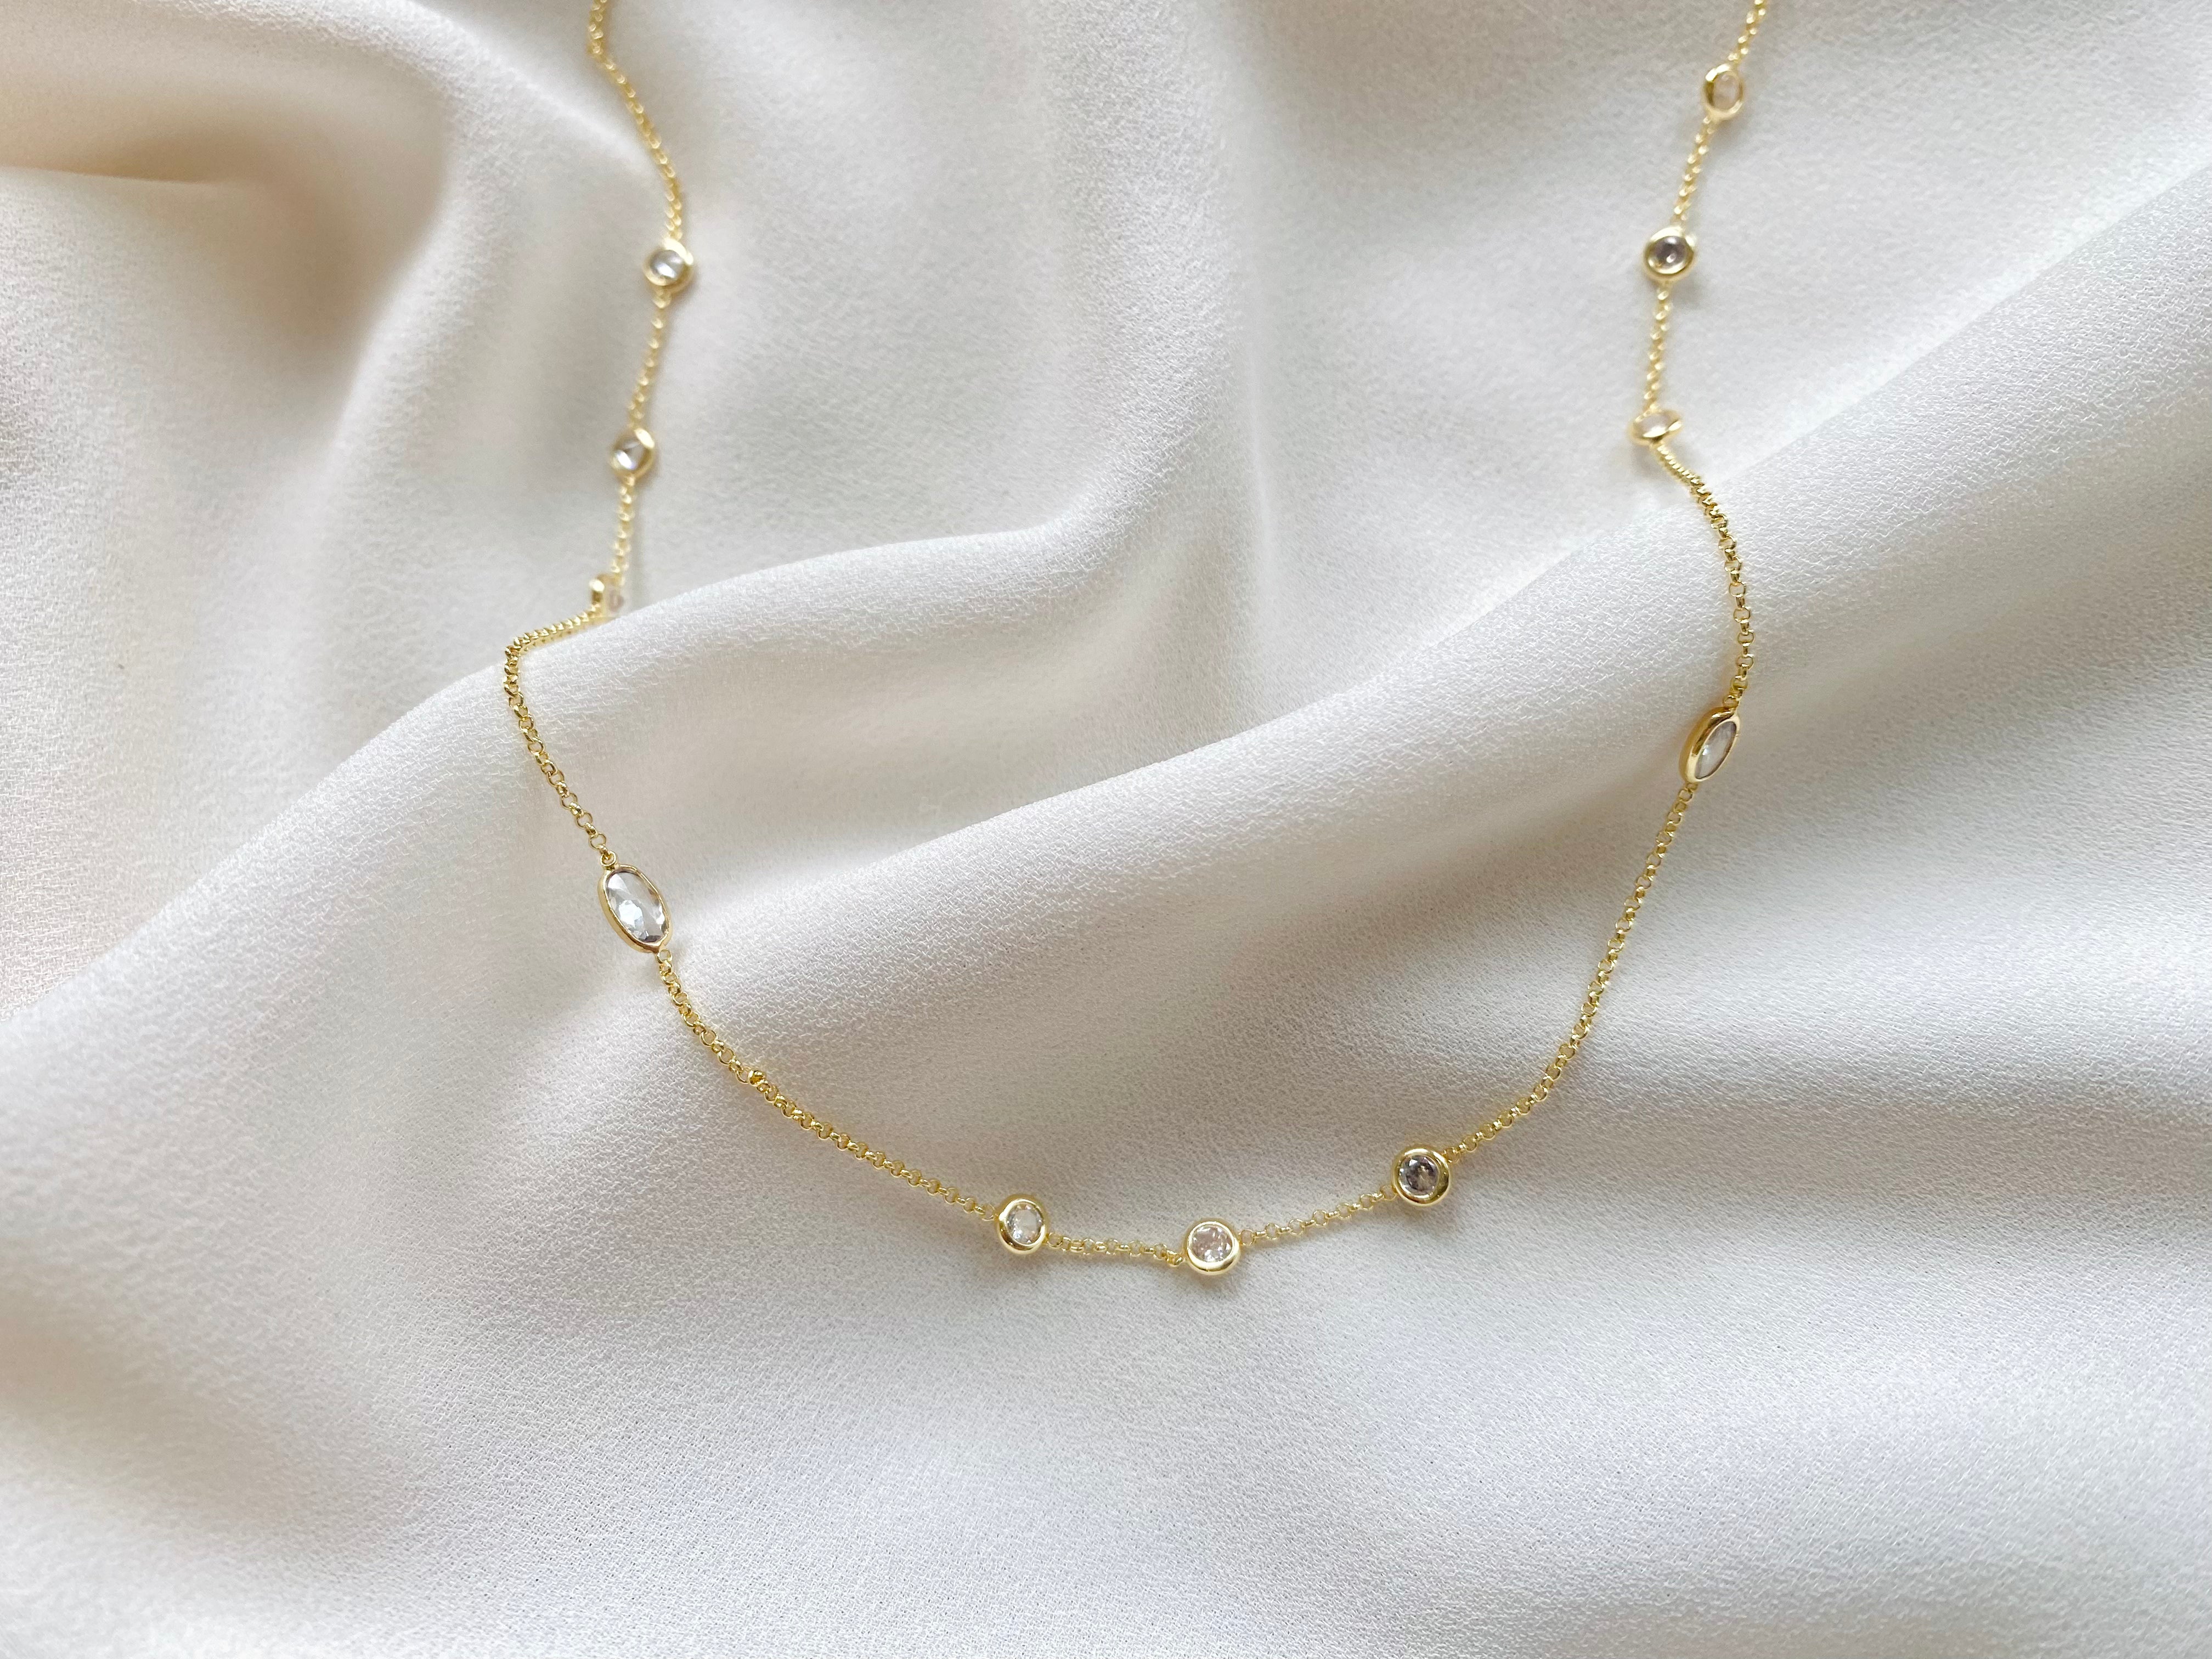 Ultra Dainty CZ adorned Chain Necklace - Gold Filled Rolo Chain - April Birthstone